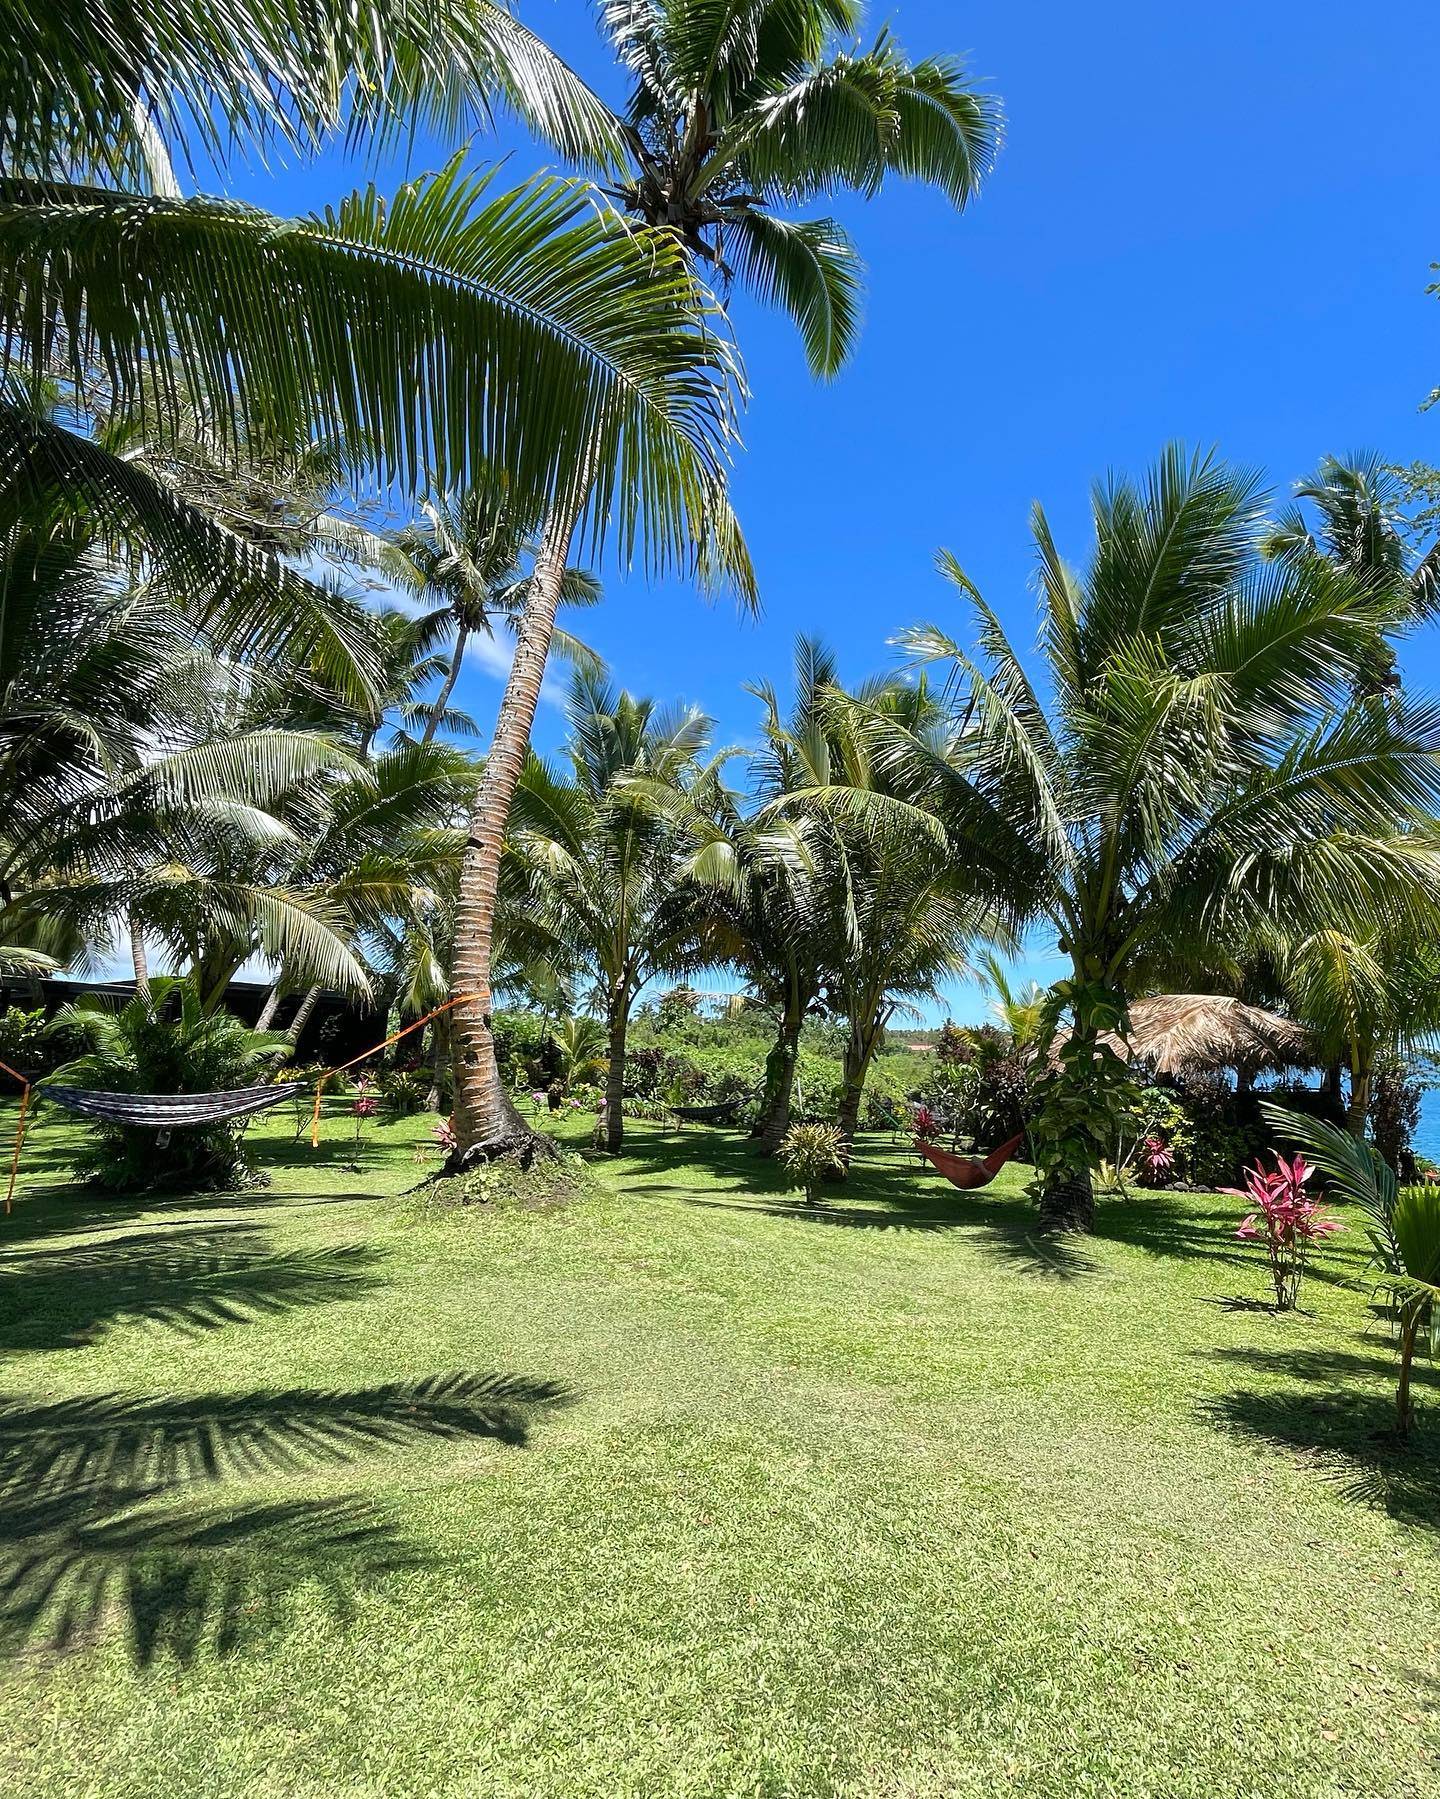 Hammock set up in palm trees and coconut trees with clear blue skies